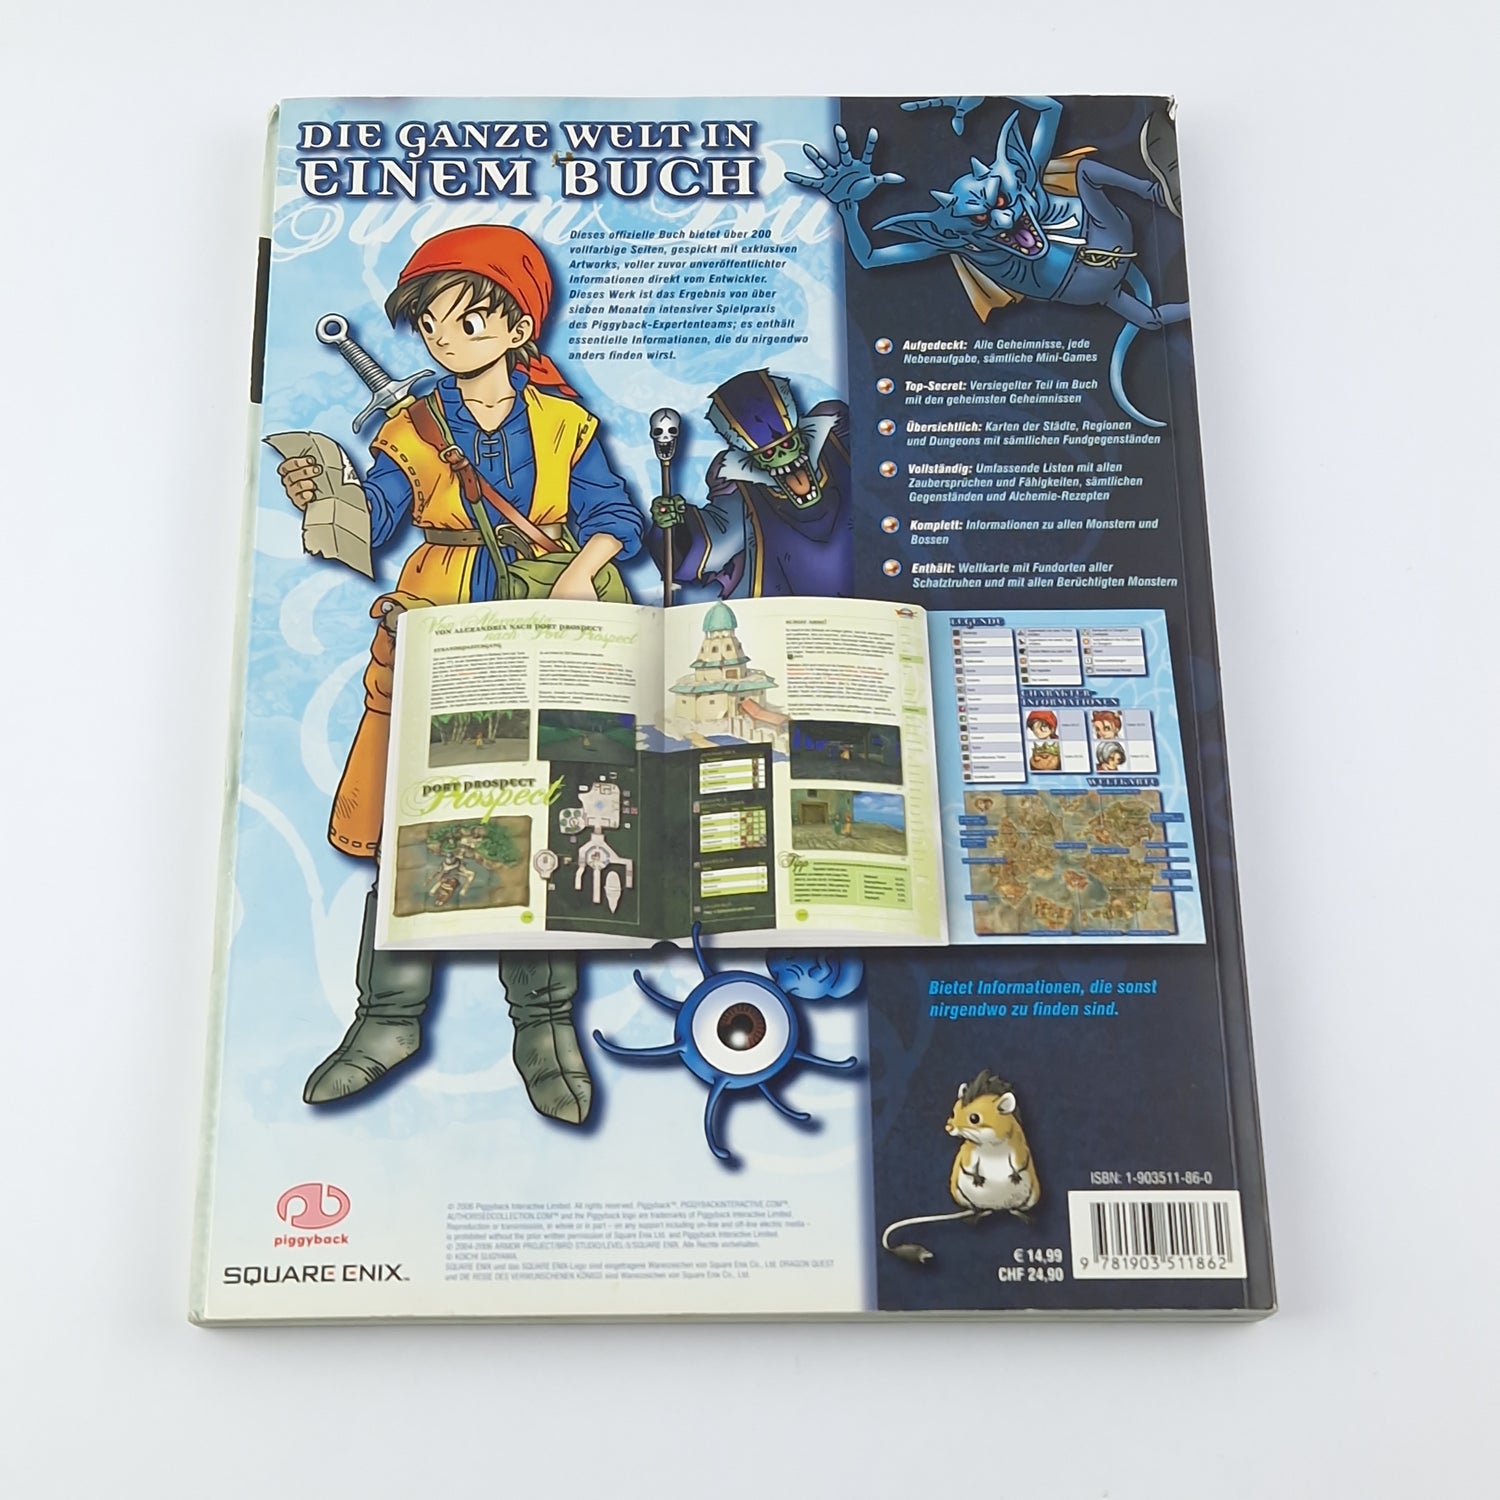 Nintendo 3DS: Dragon Quest VIII The Journey of the Cursed King NEW + Guide